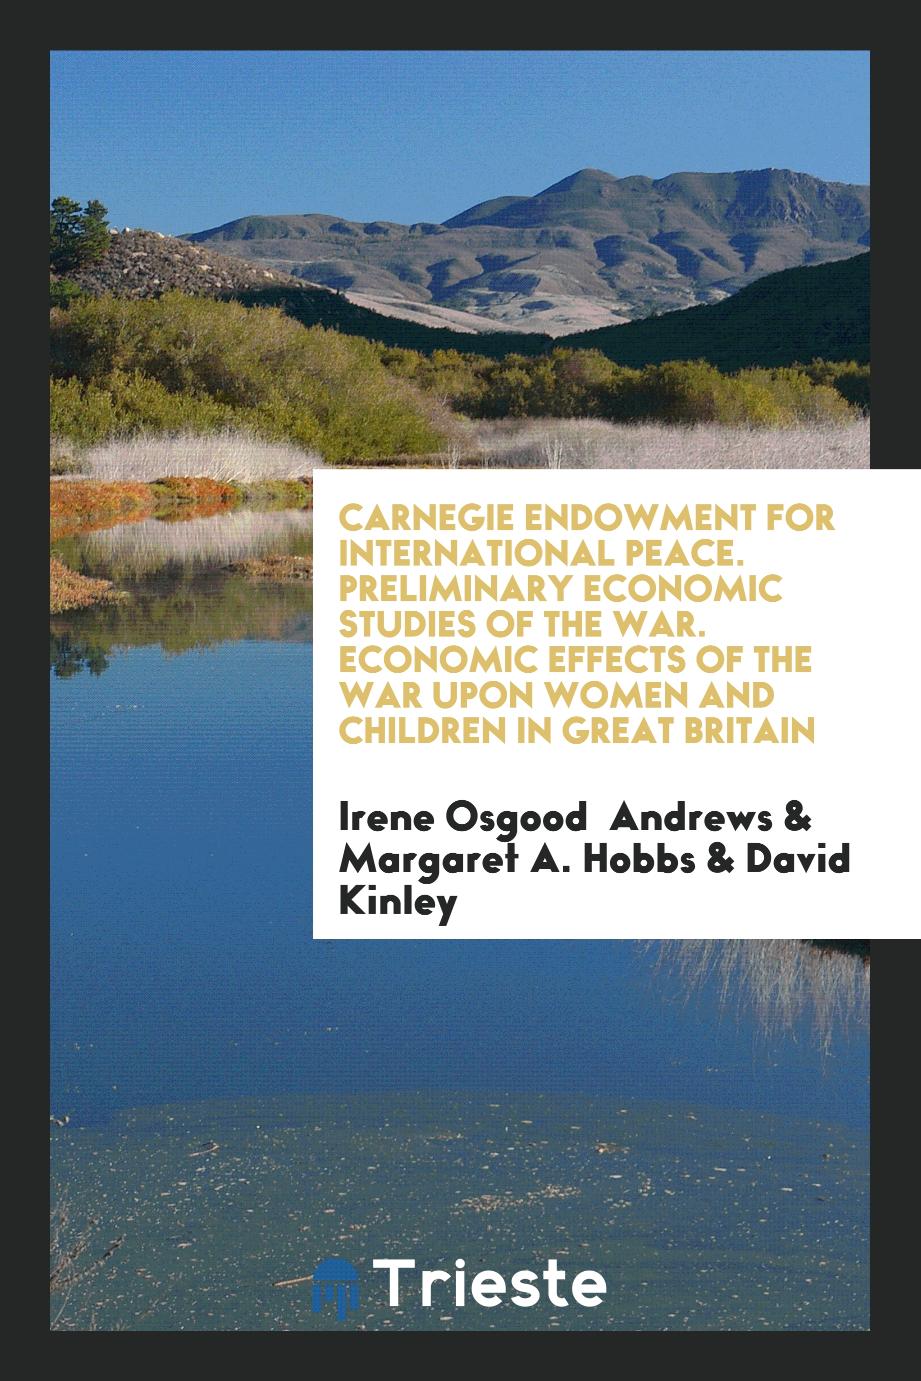 Carnegie Endowment for International Peace. Preliminary Economic Studies of the War. Economic Effects of the War upon Women and Children in Great Britain